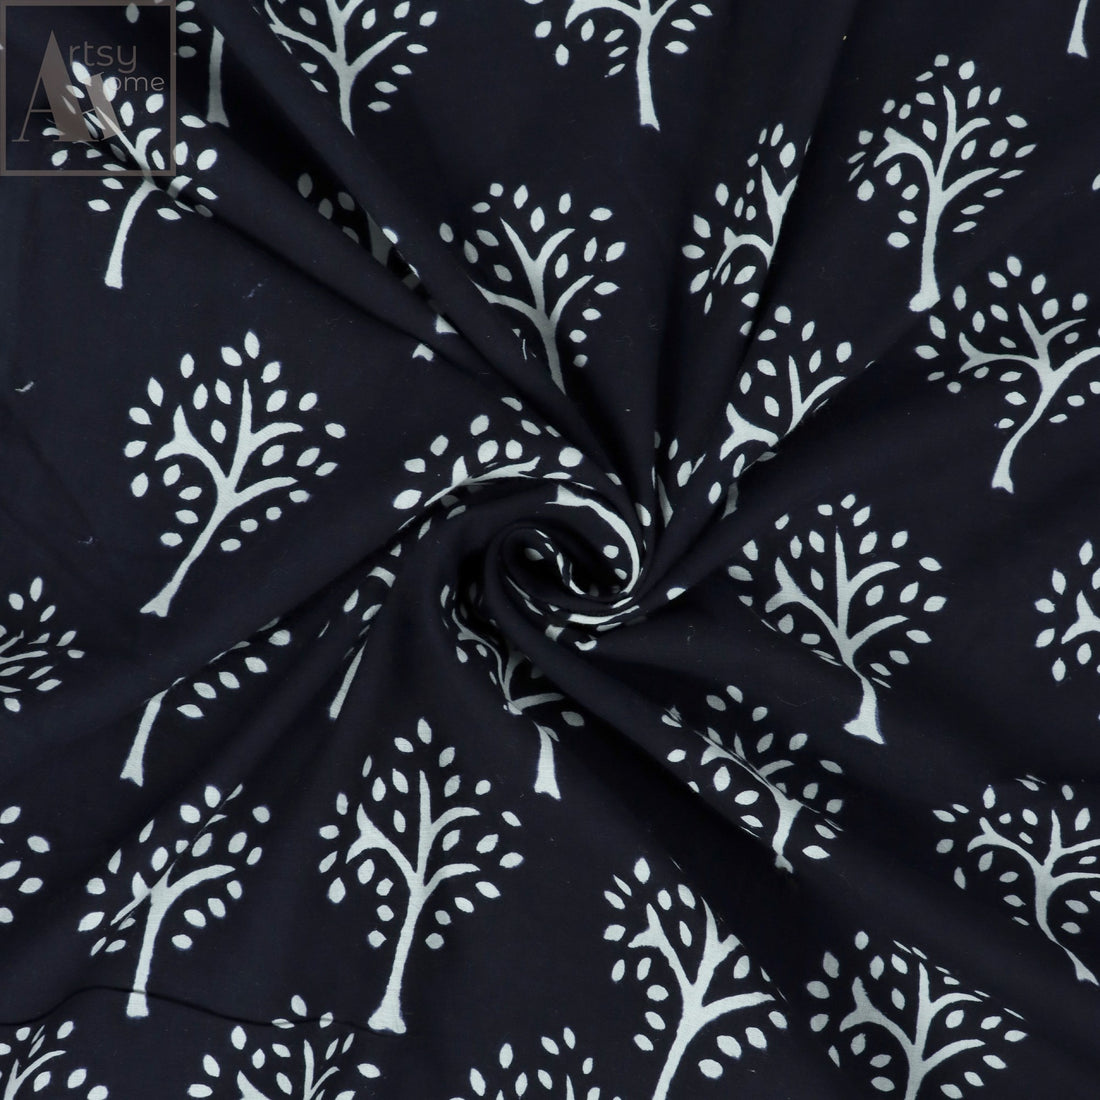 Floral Printed Black And White Cotton Fabric Material Online